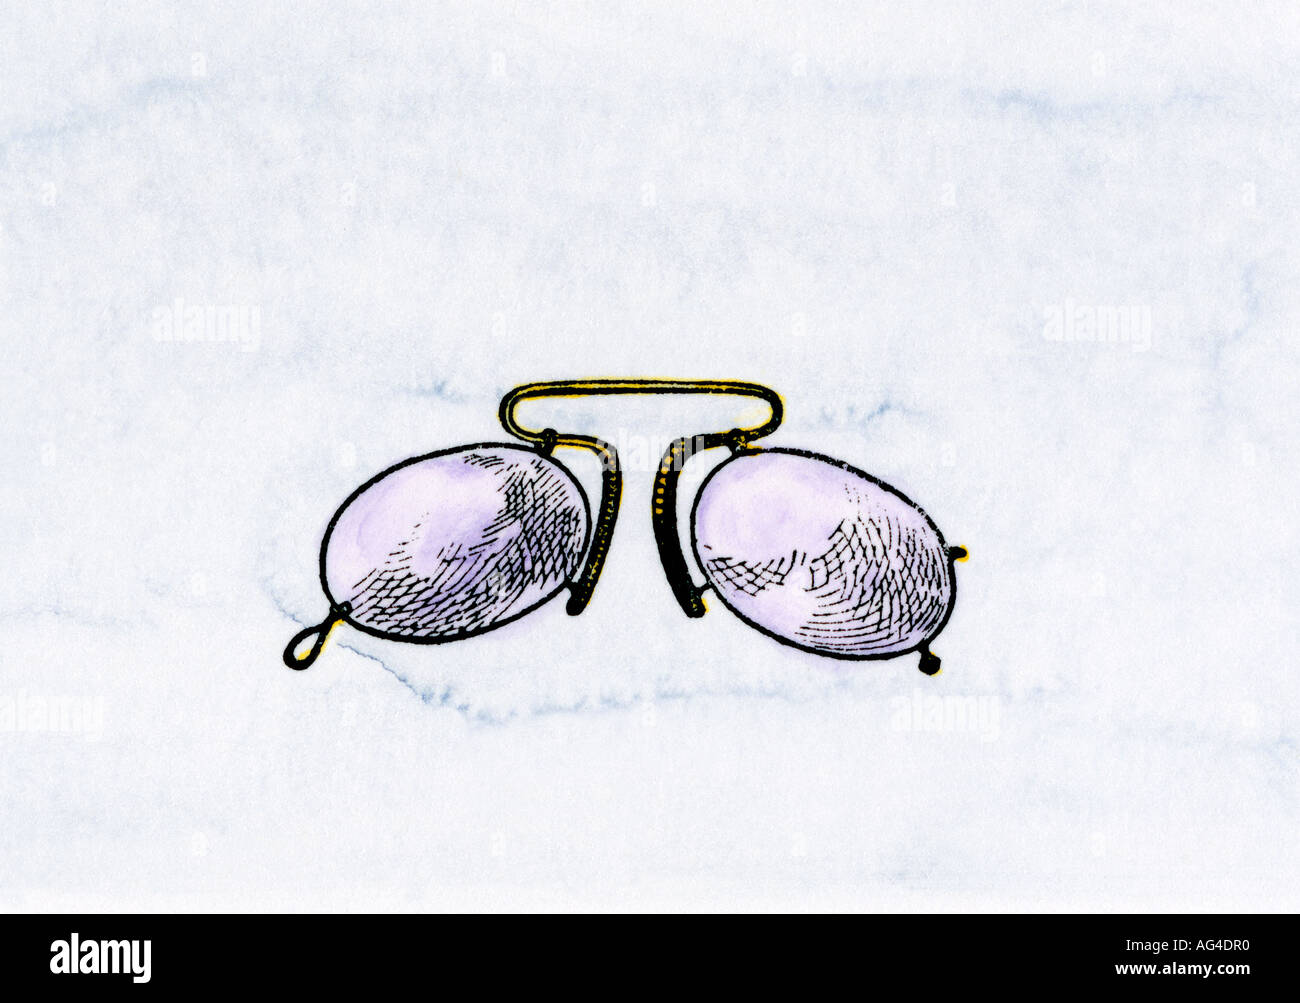 Pince-Nez / 3 Pack - Global Vision